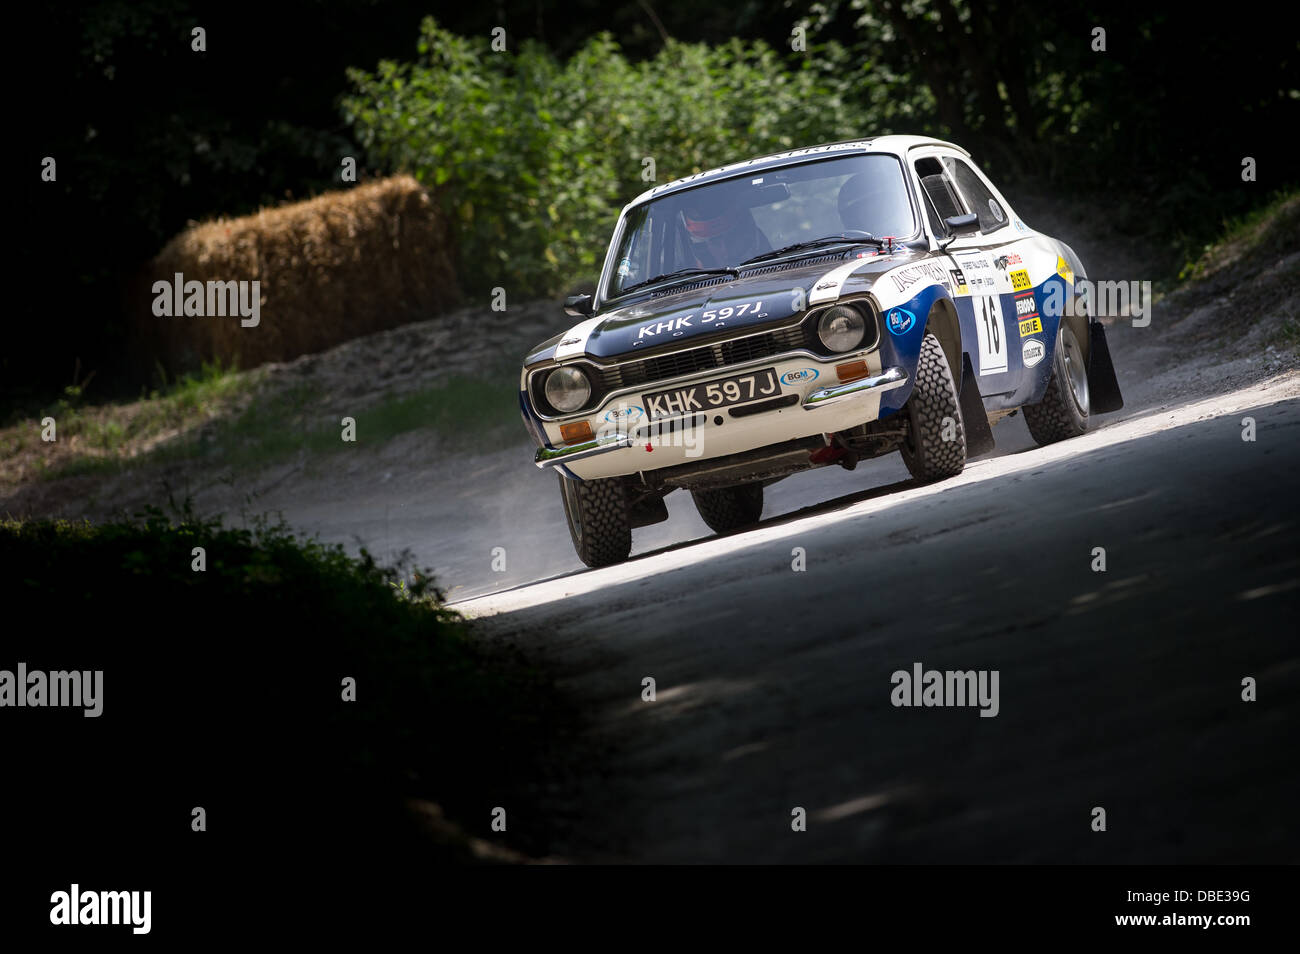 Chichester, UK - July 2013: Ford Escort MK1 RS1600 in action on the rally stage at the Goodwood Festival of Speed 2013 Stock Photo